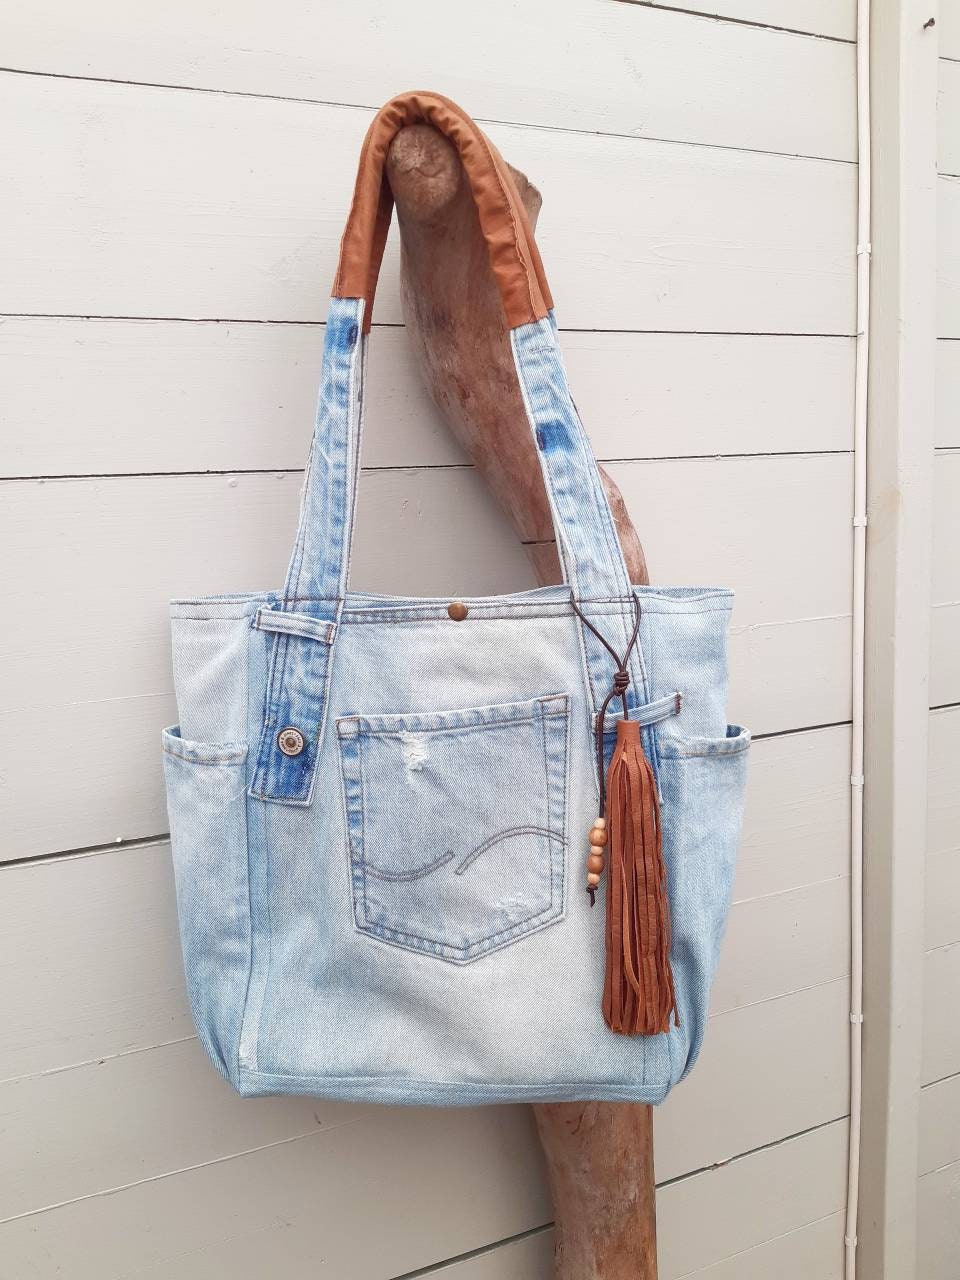 Jeans shopper with leather upcycled jeans bag denim tote | Etsy